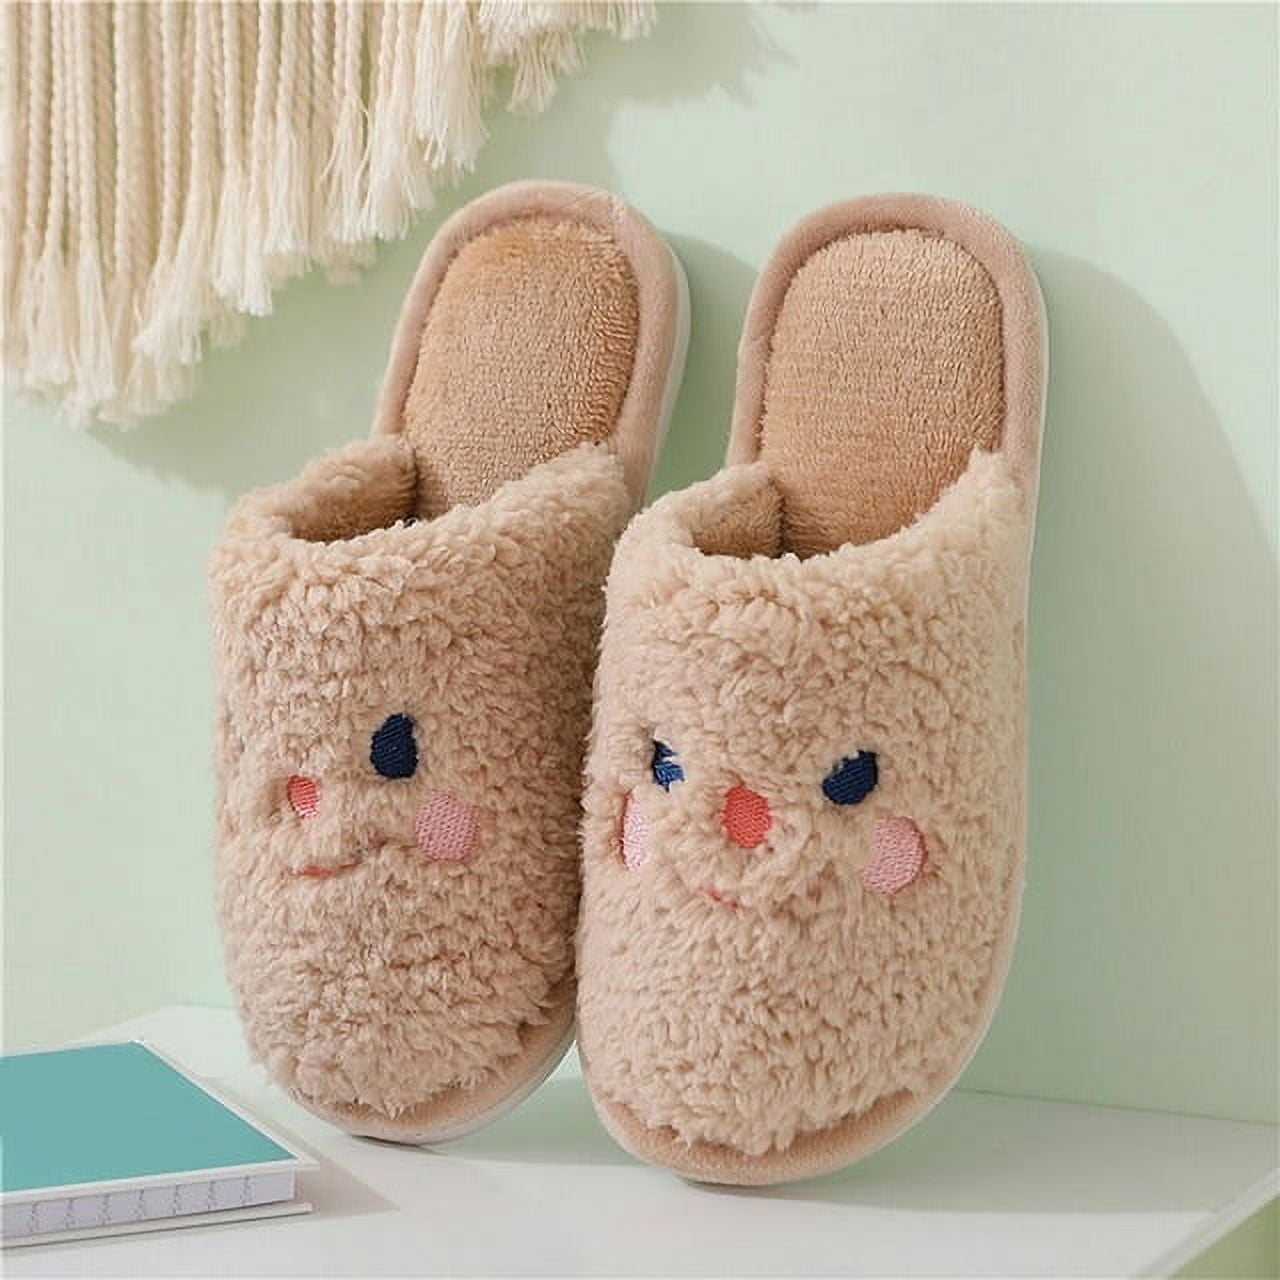 Comfy Feet All Around Slippers - Plush Unisex Slippers,  Indoor/Outdoor House Shoes - Lightweight And Warm Slippers With Rubber  Soles, Memory Foam Footbed, and Real Laces - Funny Gift For